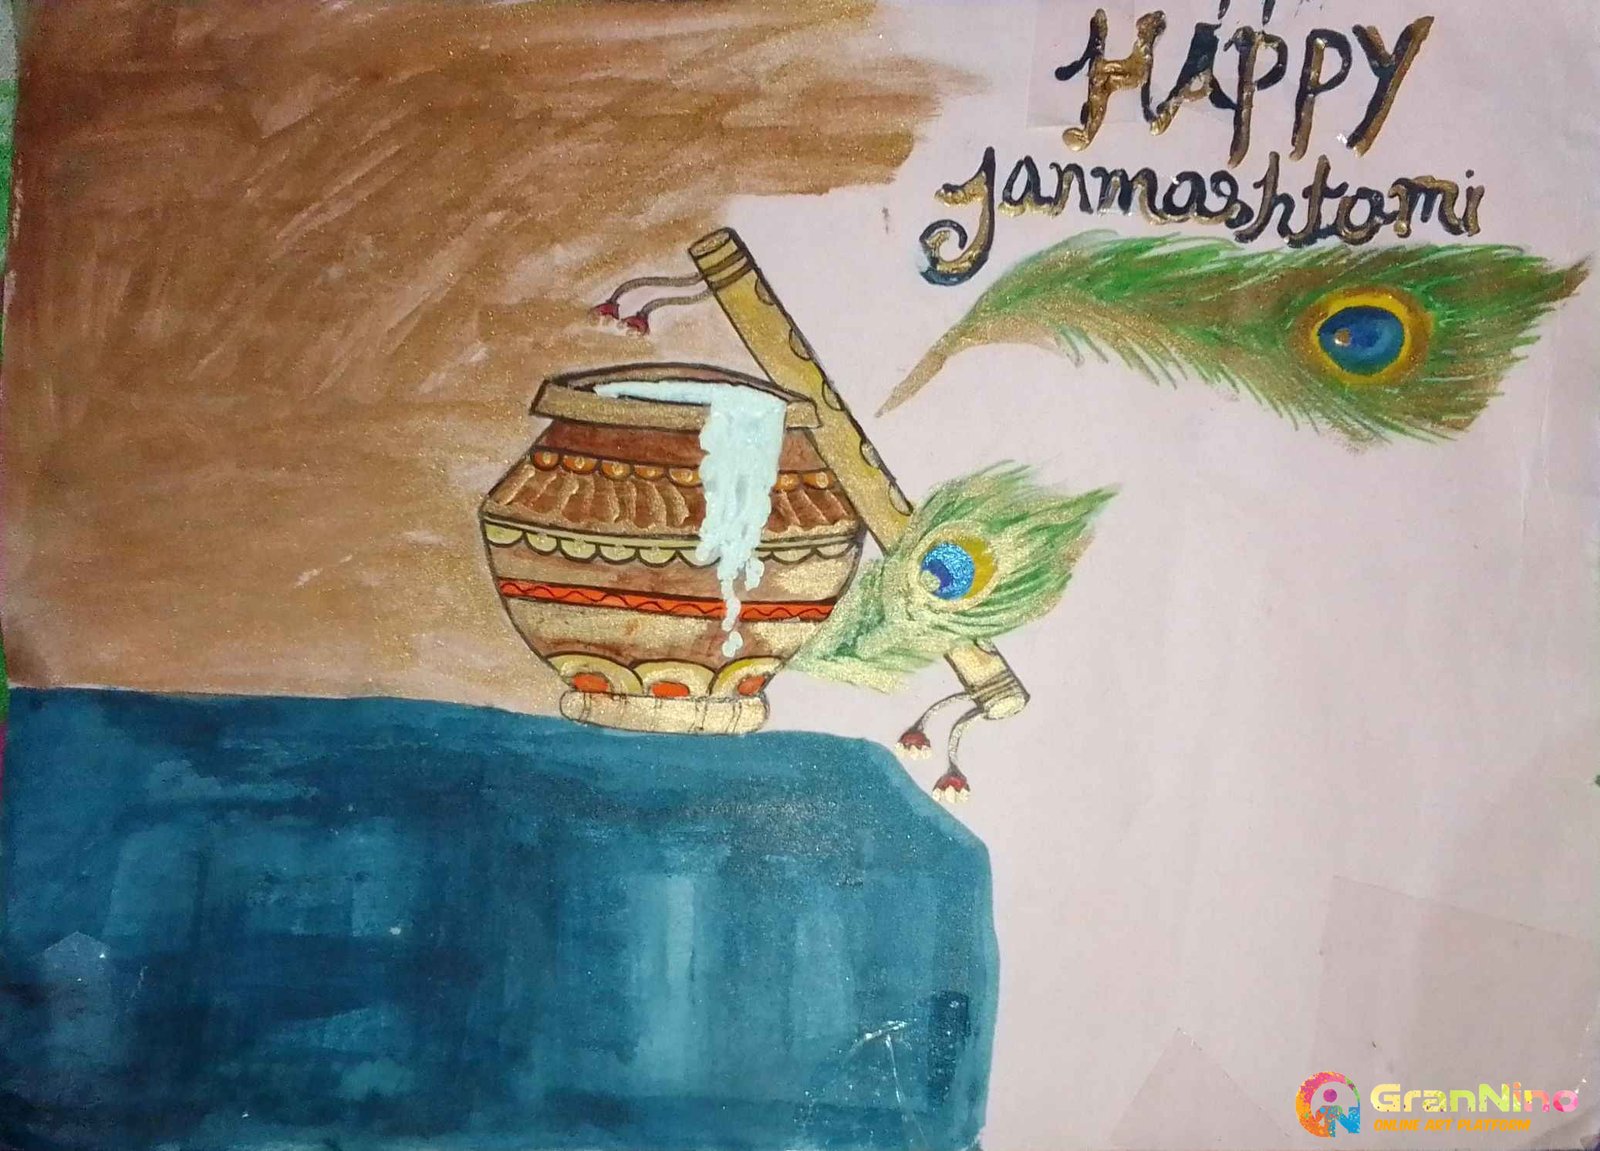 The Creation Art & Craft - https://youtu.be/lrlXkCiJQ6I ❤Janmashtami  Special Artwork using OIL PASTELS. Step by step drawing Krishna. Anyone can  do it easily. Click the link below ❤ https://youtu.be/lrlXkCiJQ6I Don't  forget to